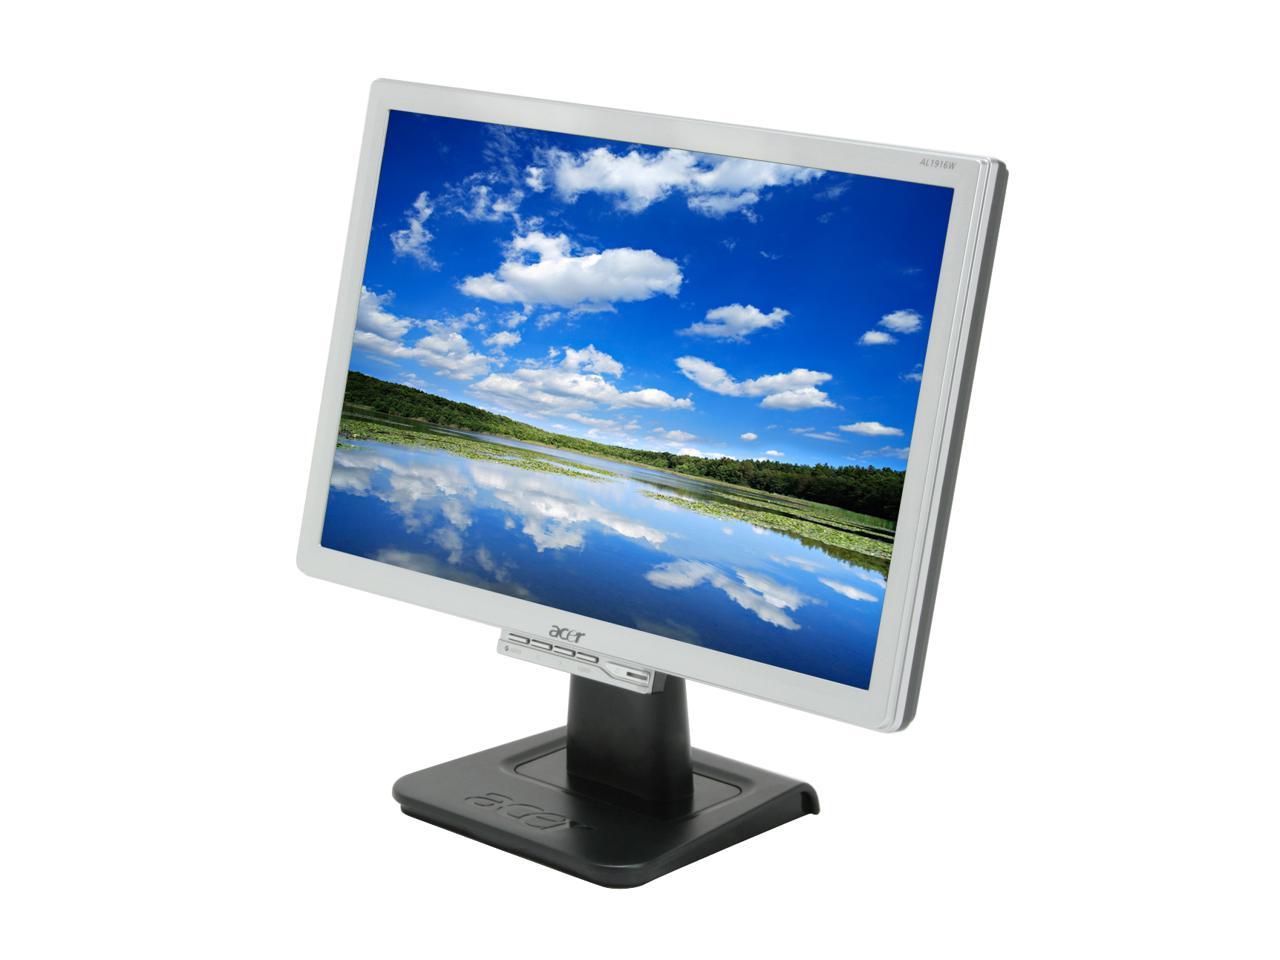 Acer AL1916W 19" Widescreen LCD Computer Monitor VGA Only Free Shipping 